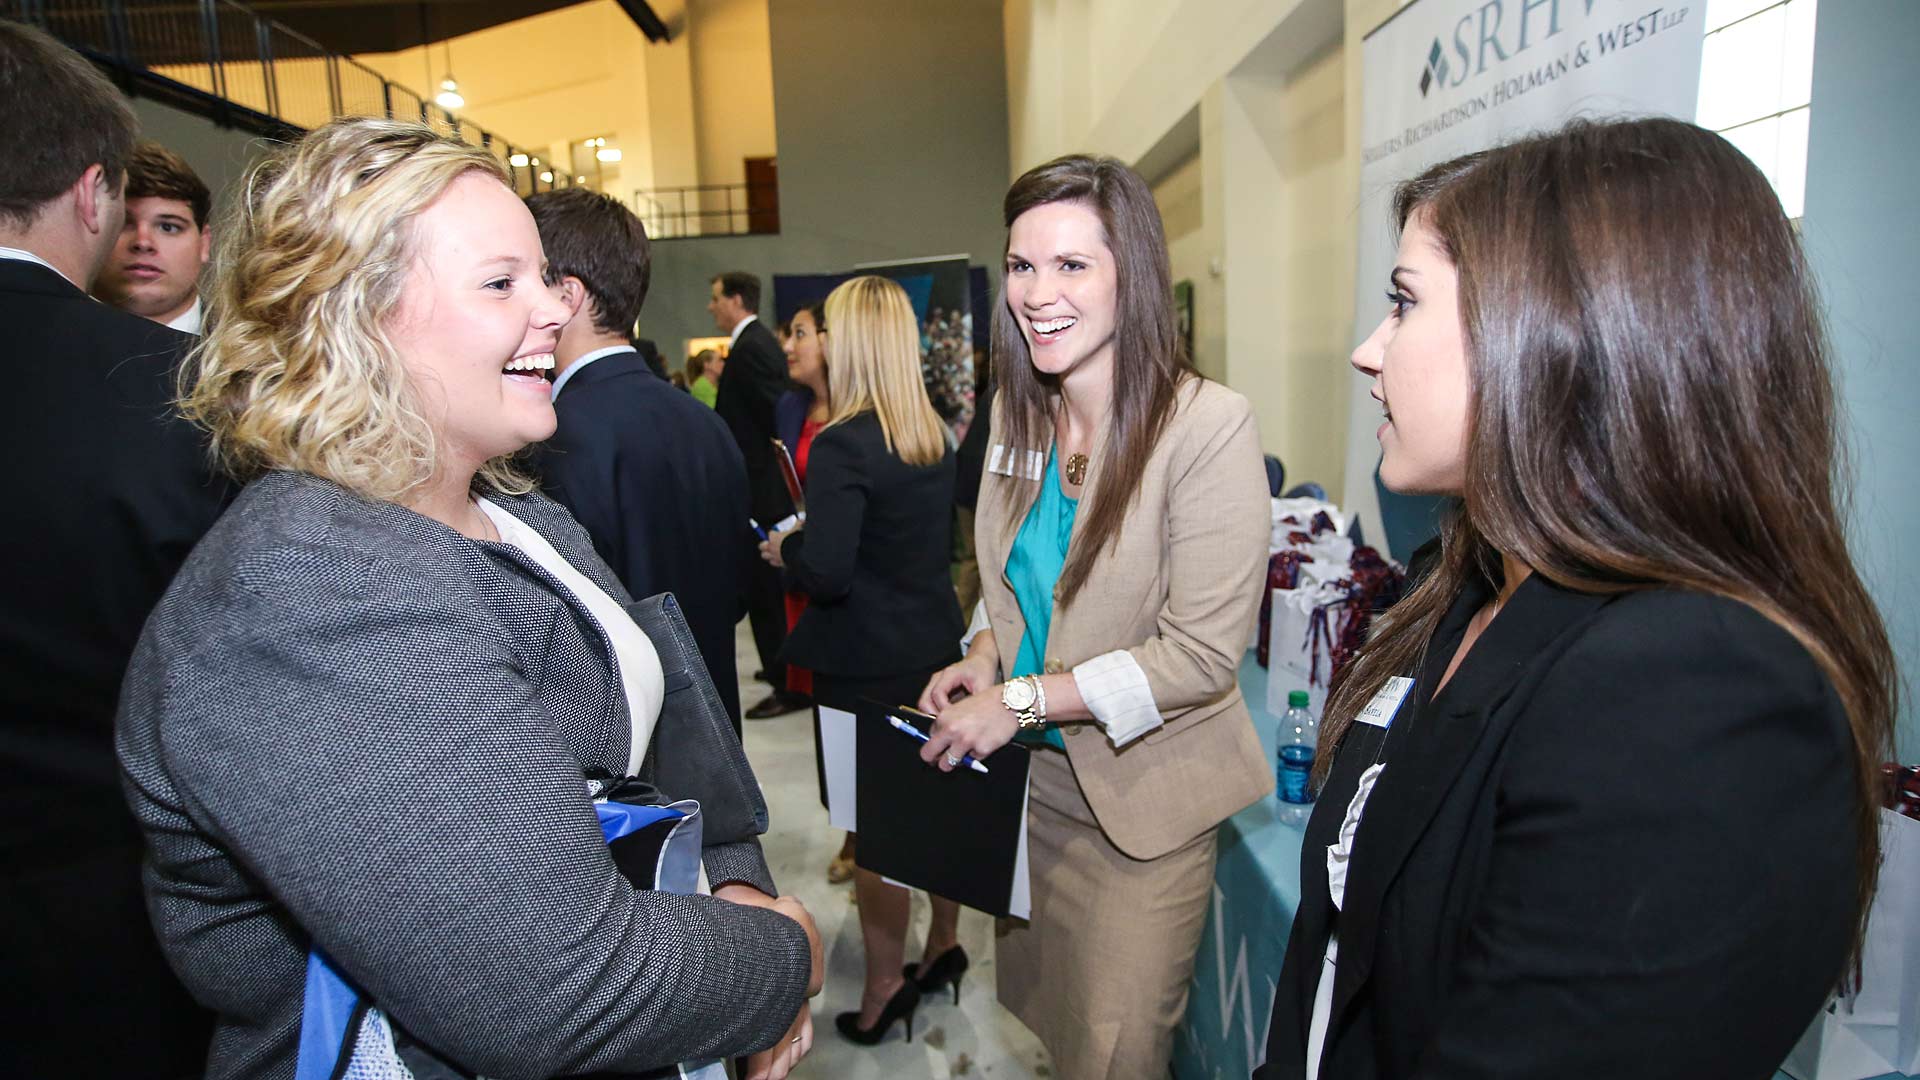 Students Talking with Employers